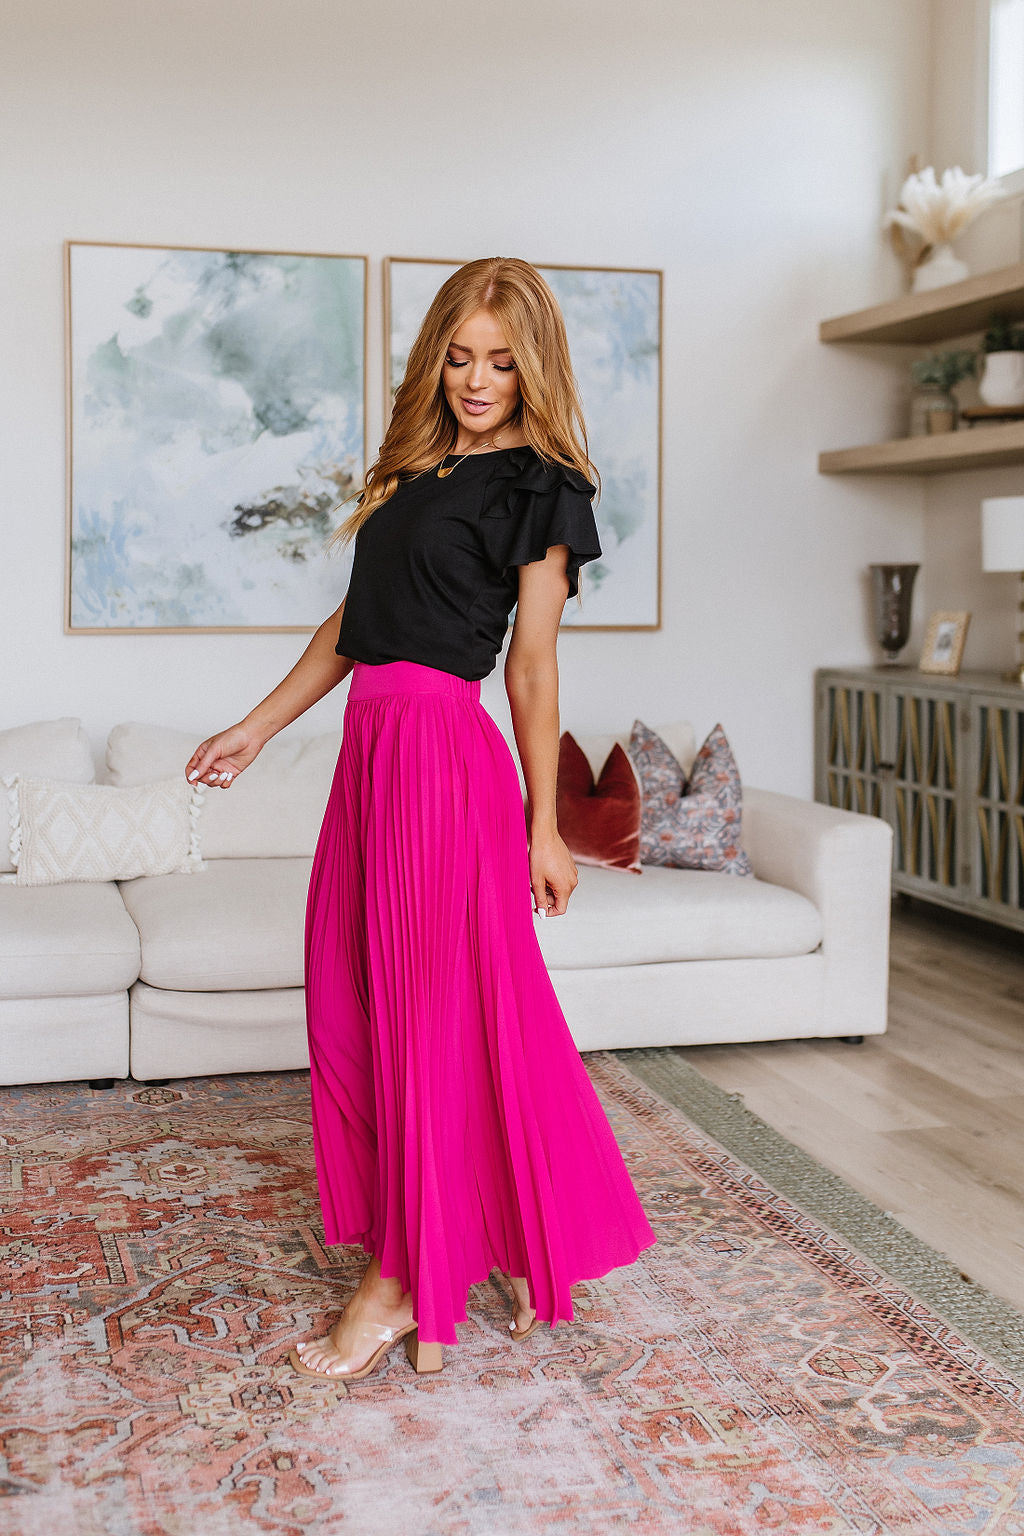 Just Too Hot Midi Skirt in Hot Pink